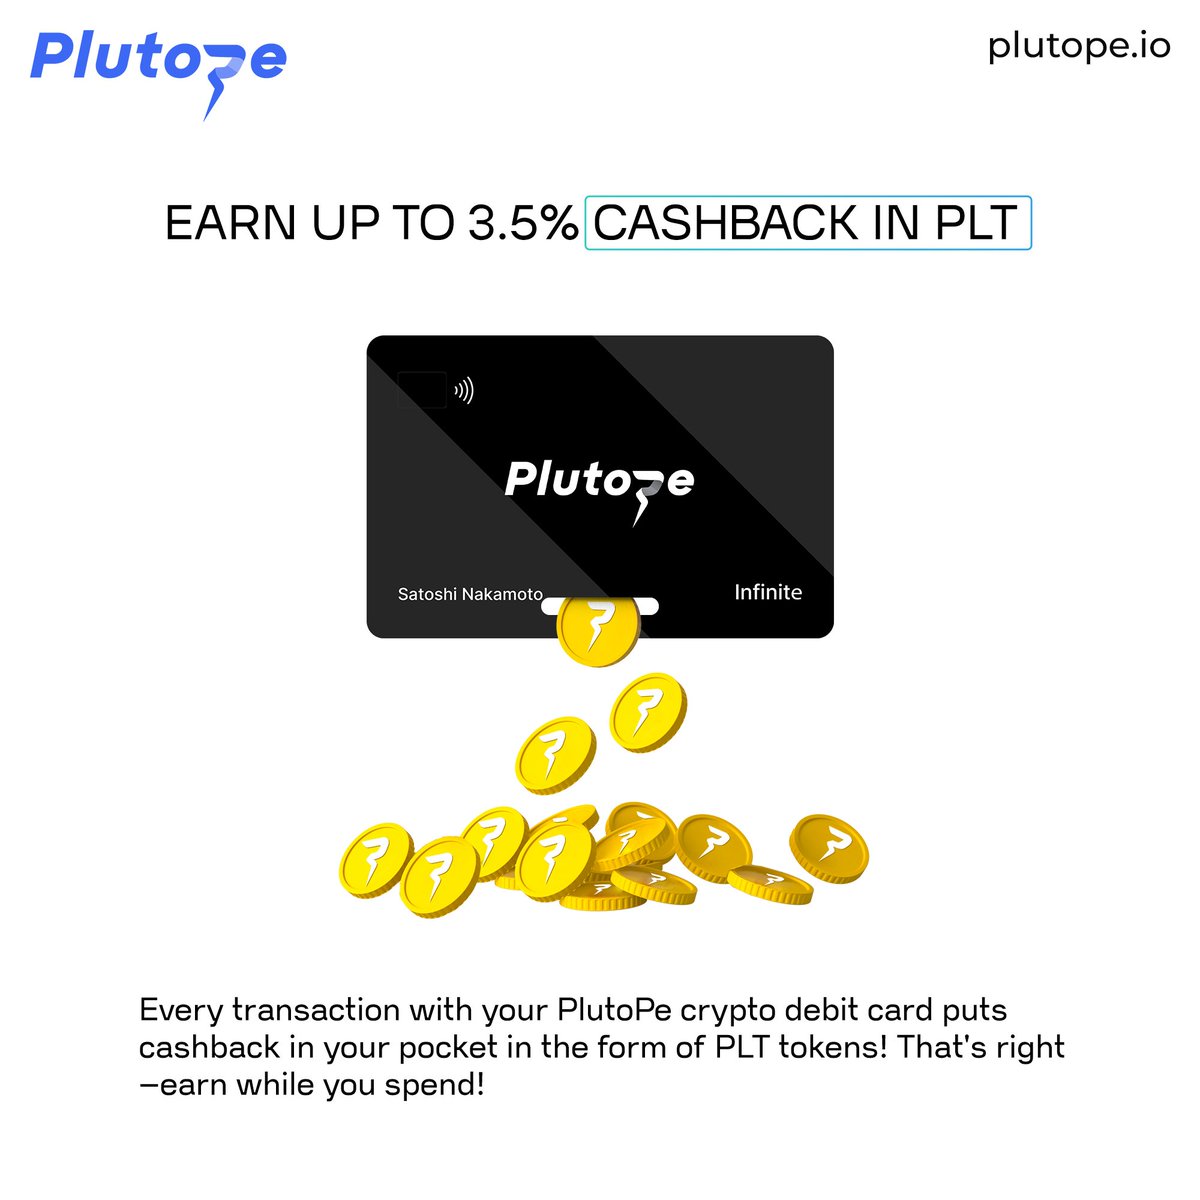 We are thrilled to announce that #PlutoPe is on the verge of launching its revolutionary #CryptoDebitCards💳 Get ready for a fresh way of spending with exceptional benefits! PlutoPe is at the forefront #FutureofFinance.
#plutope